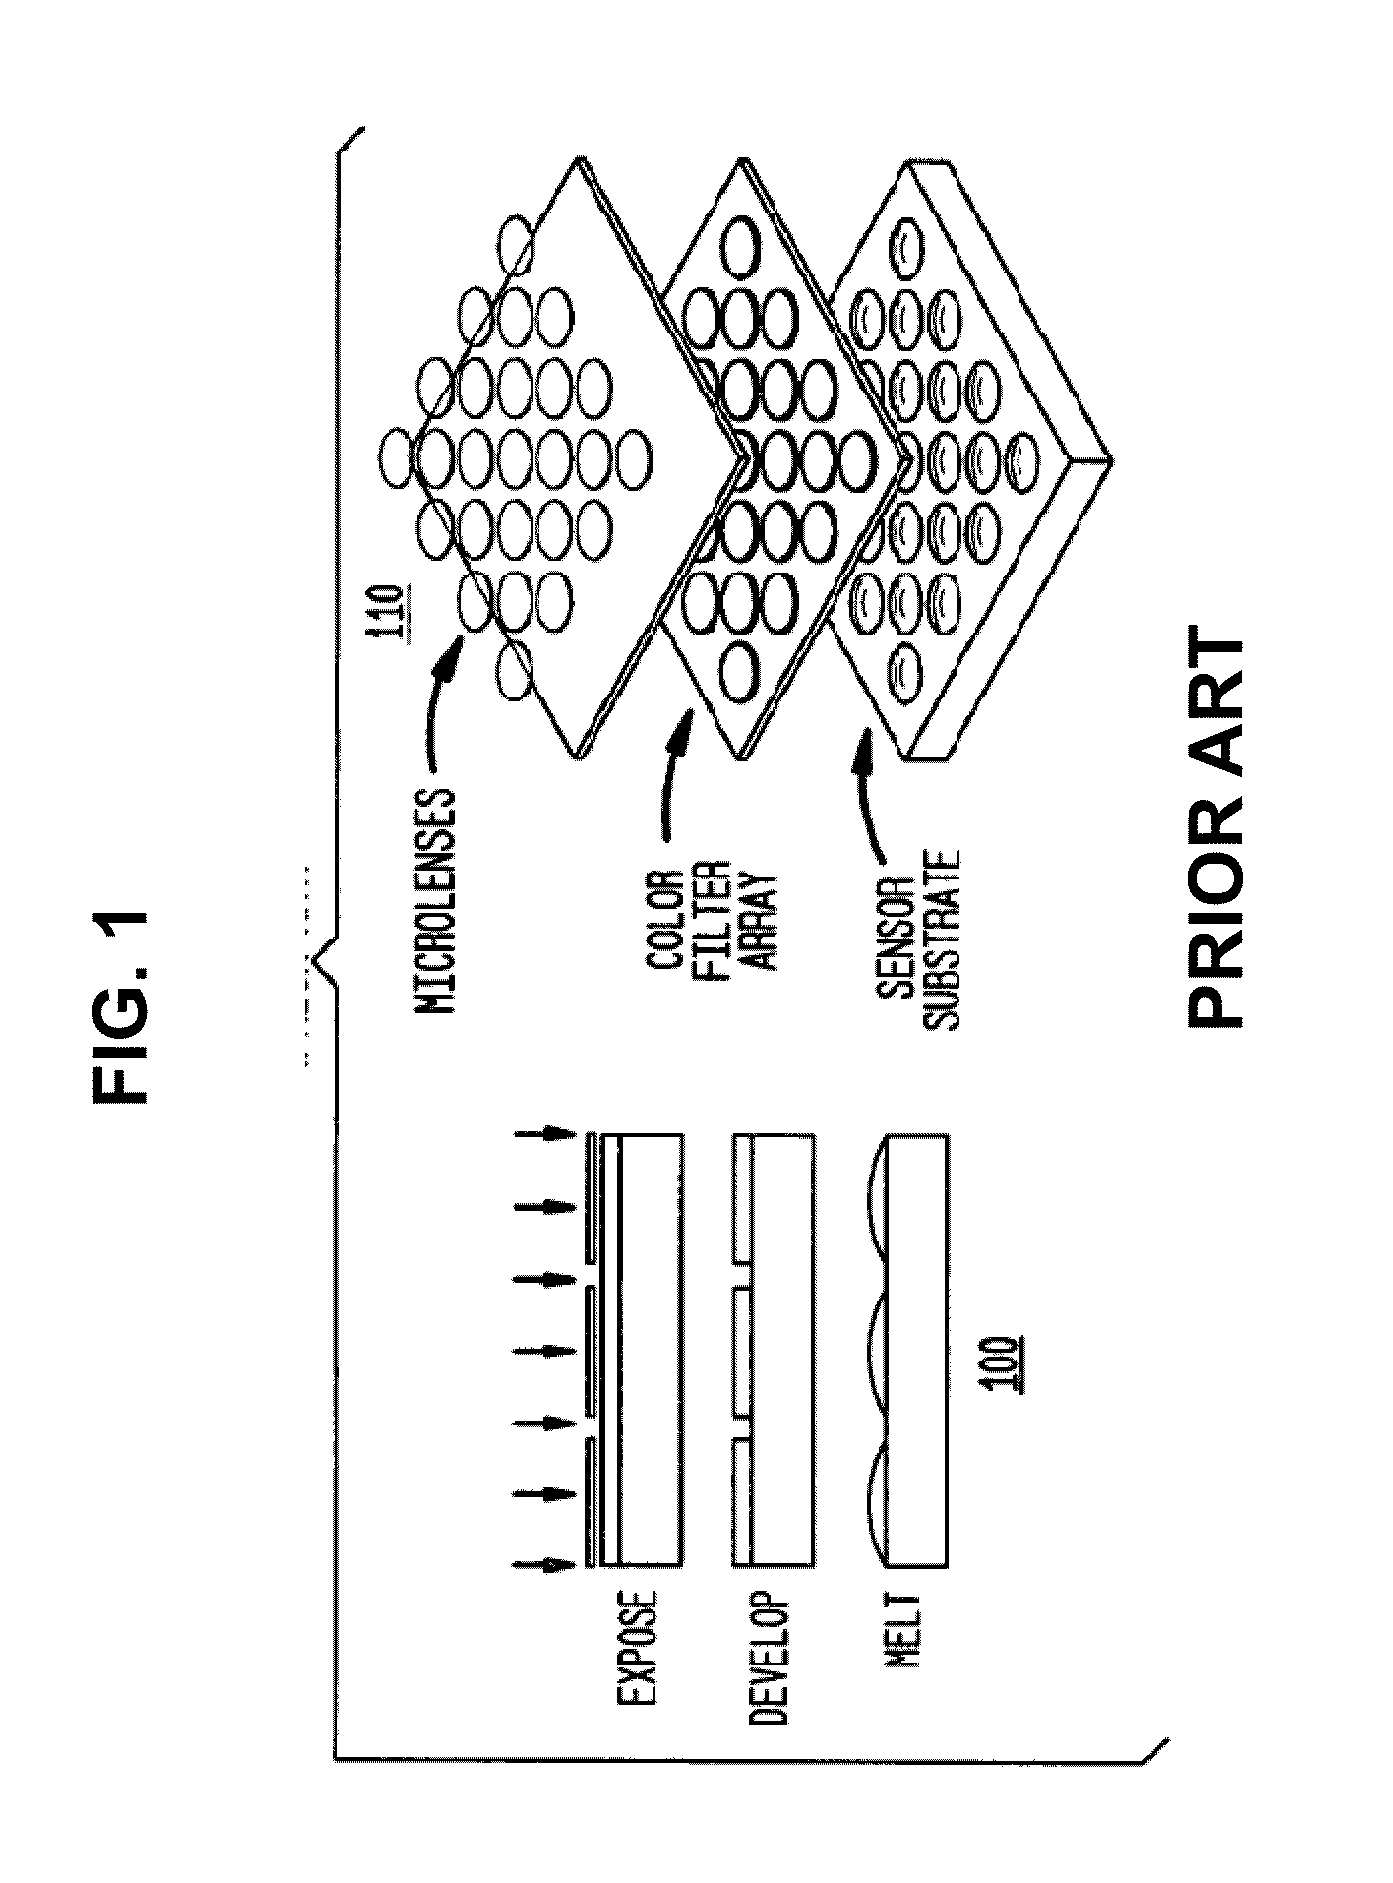 Fabrication of optical filters integrated with injection molded microlenses